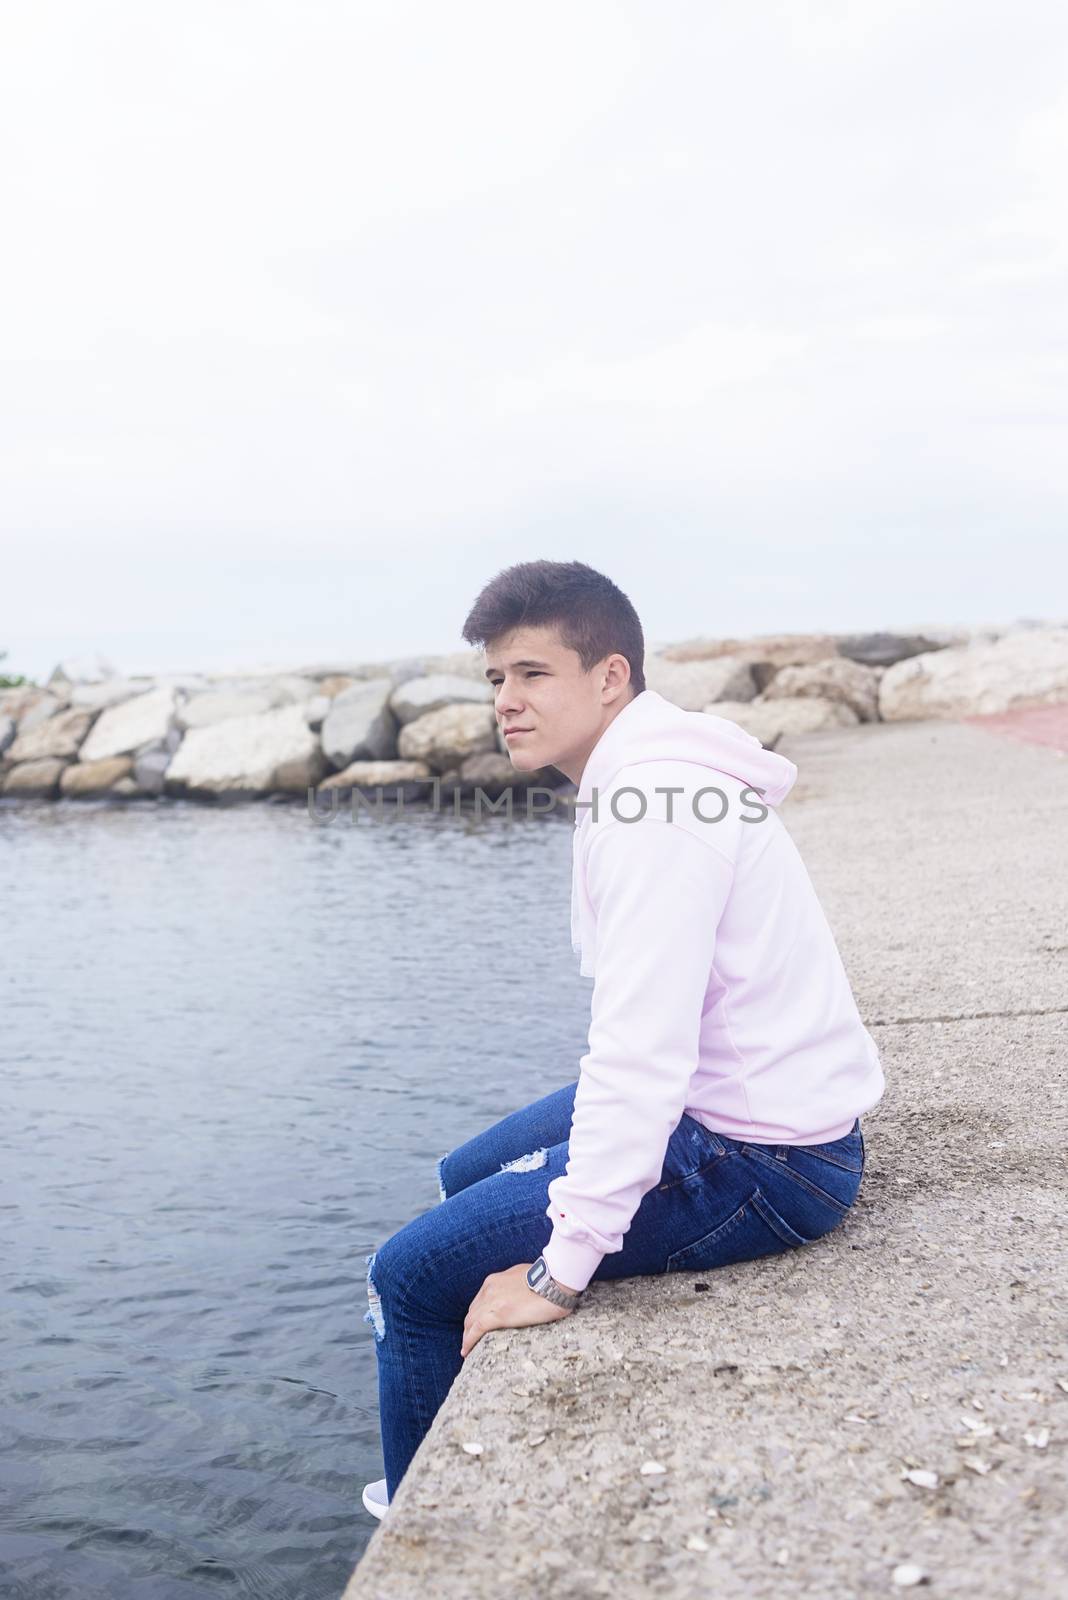 Young pensive teenager sitting on breakwaters while looking at camera